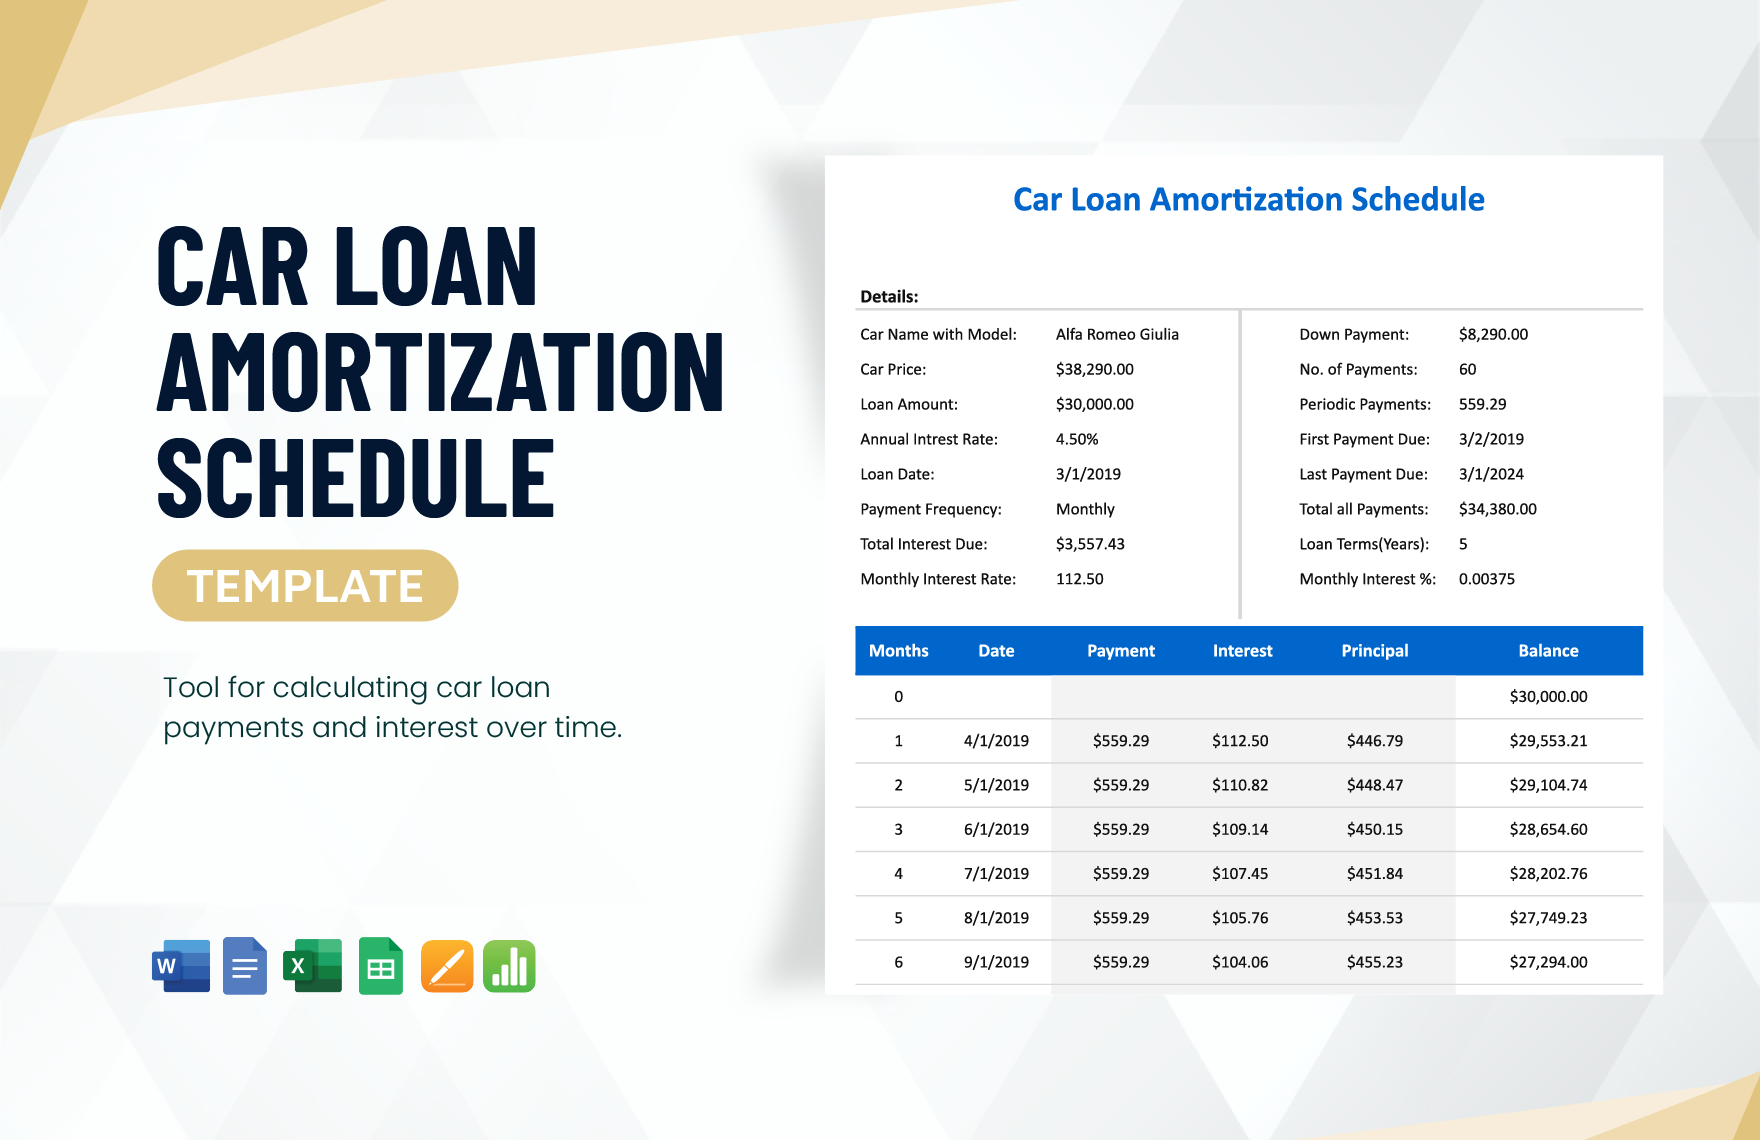 Car Loan Amortization Schedule Template in Word, Google Docs, Excel, Google Sheets, Apple Pages, Apple Numbers